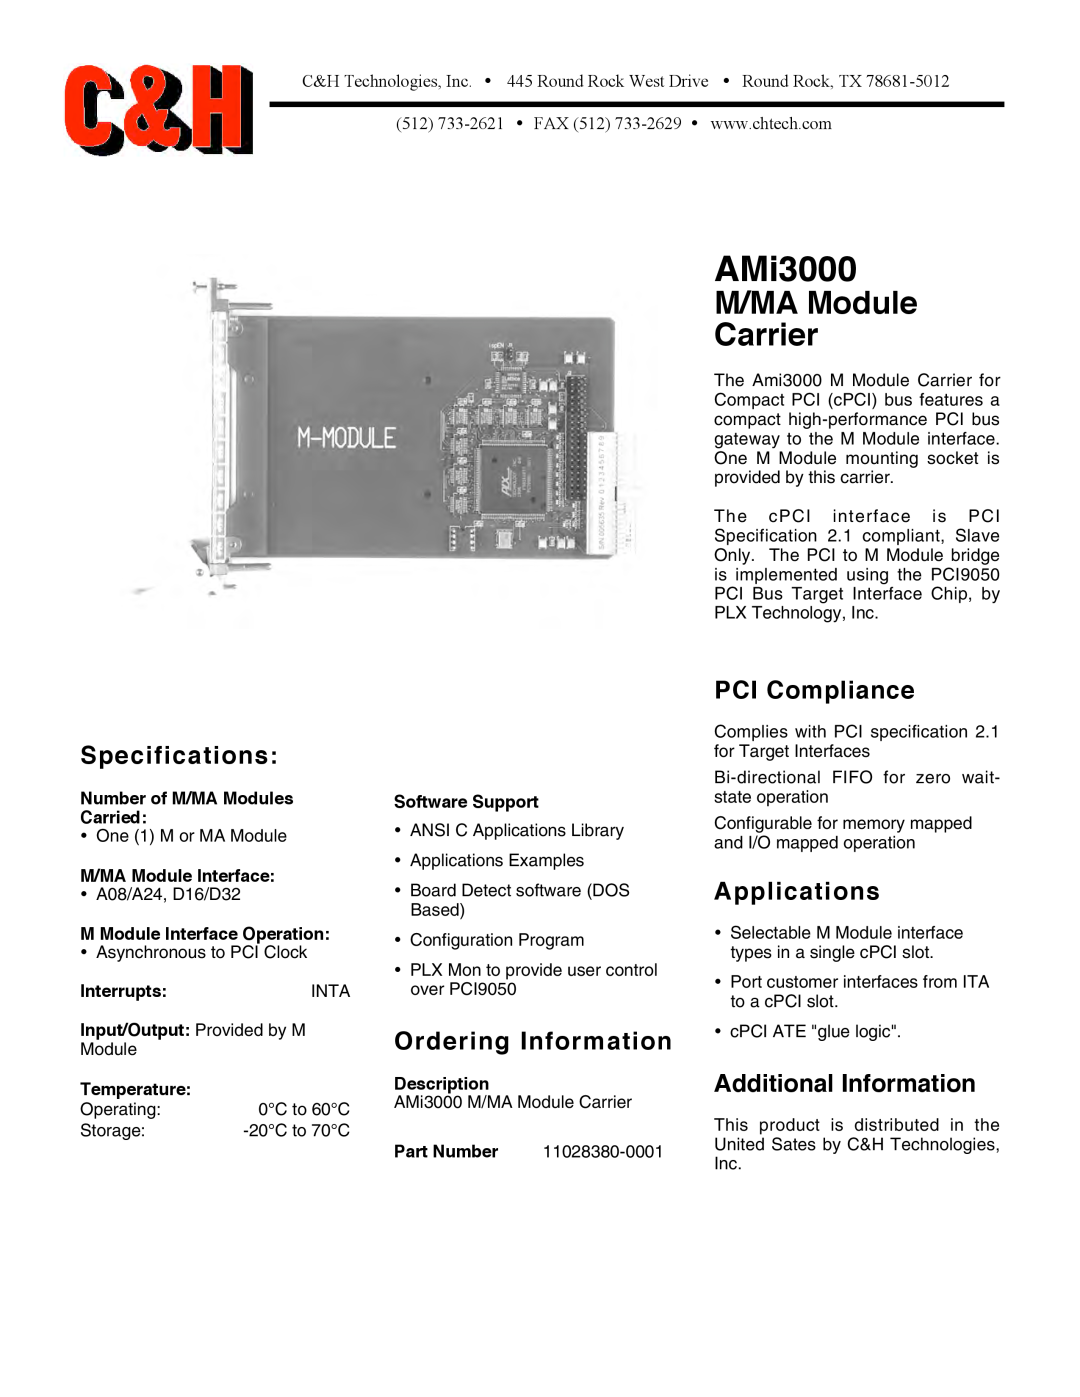 CH Tech AMi3000 specifications M/MA Module Carrier, Specifications, Ordering Information, PCI Compliance, Applications 